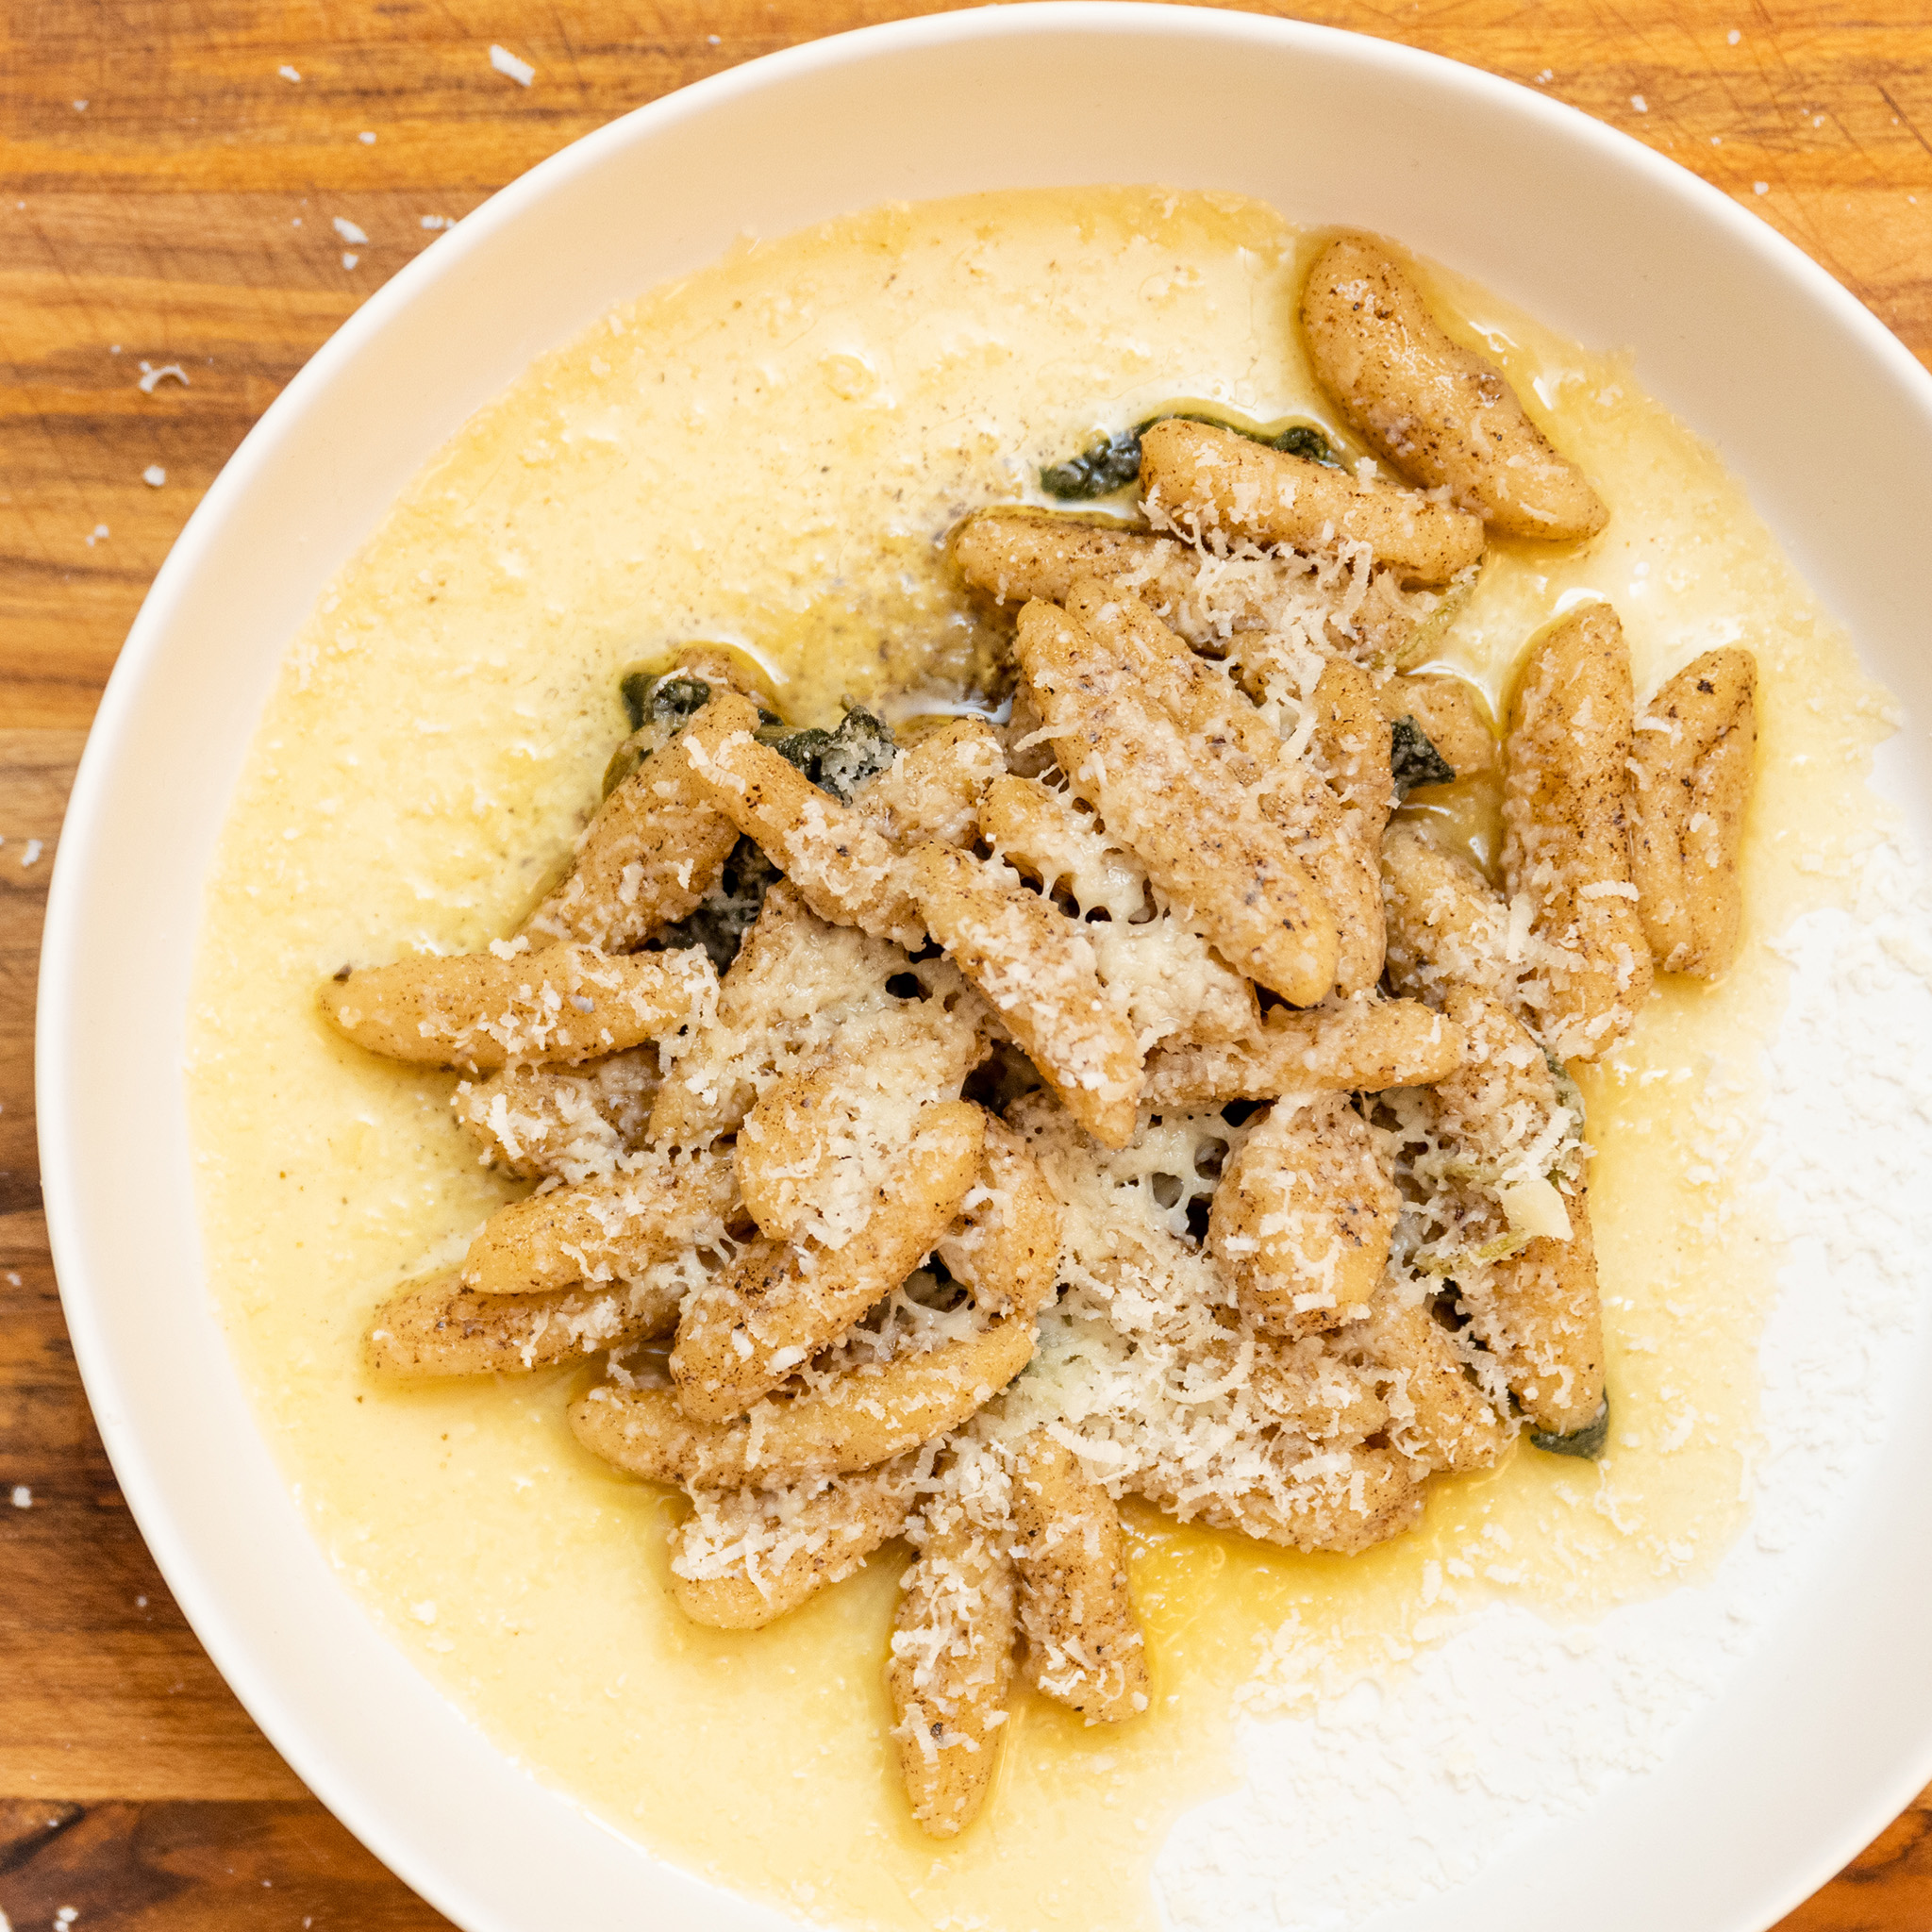 Carla Lalli Music's Handmade Cavatelli with Brown Butter and Sage